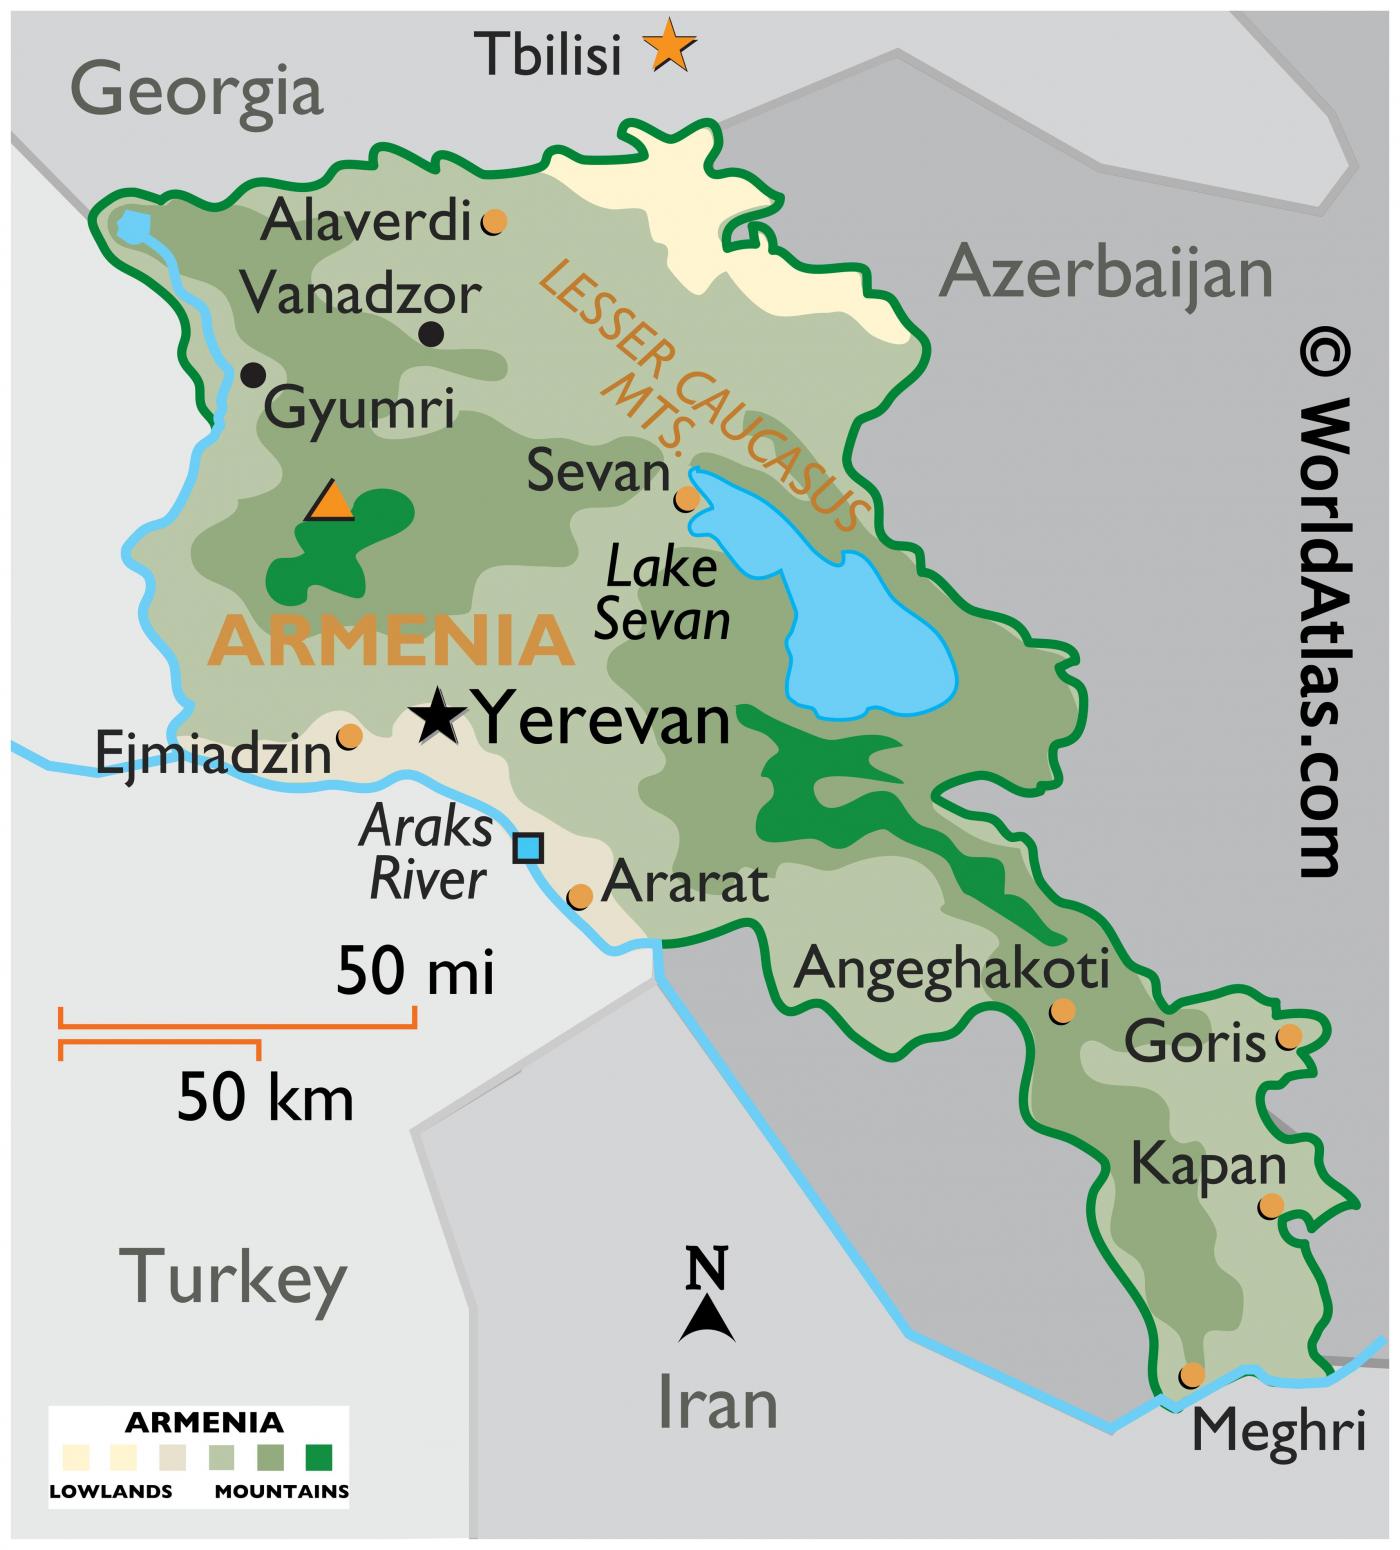 A map of Armenia, showing the different regions of the country